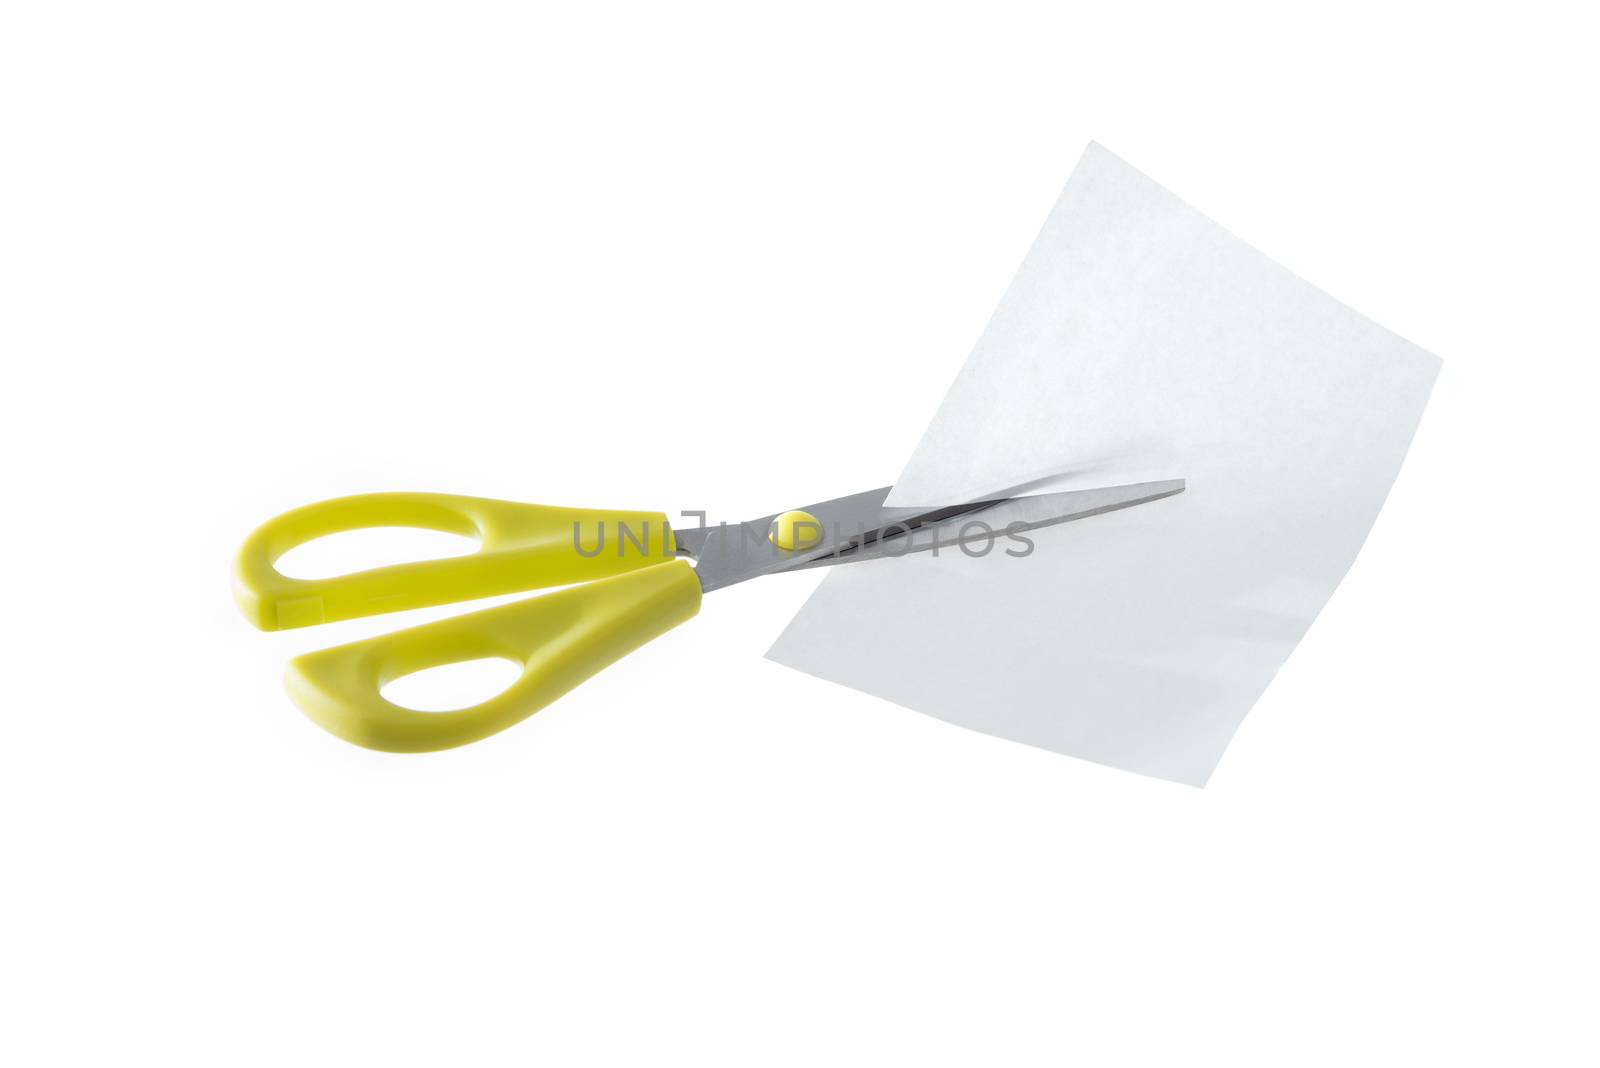 A pair of yellow scissors cutting a piece of white paper isolated on a white background.